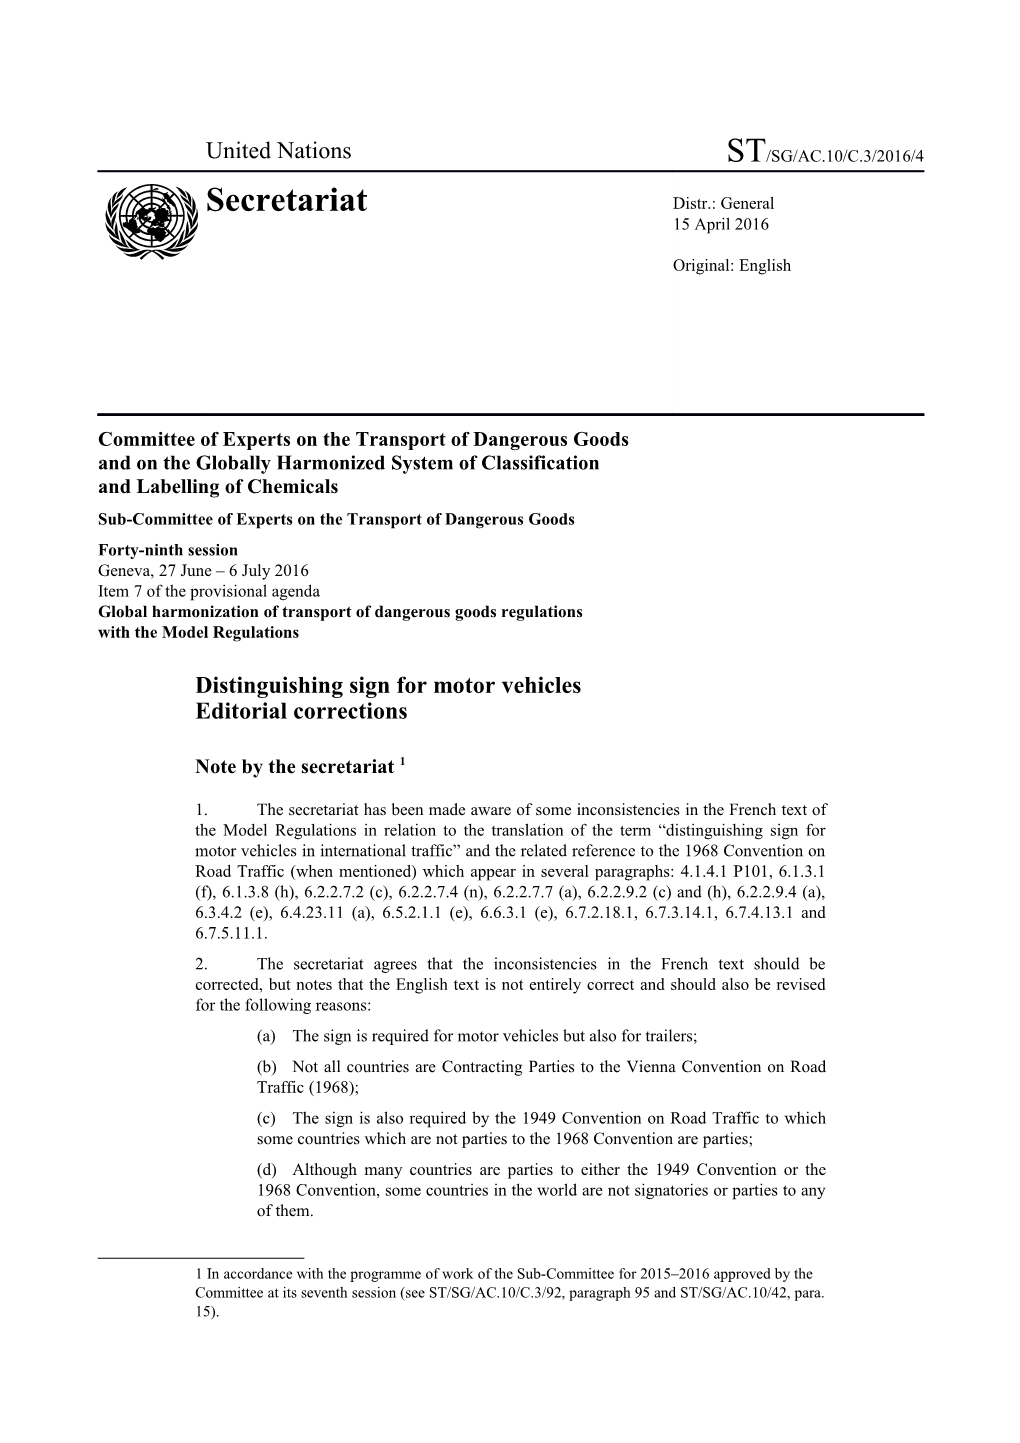 Sub-Committee of Experts on the Transport of Dangerous Goods s4